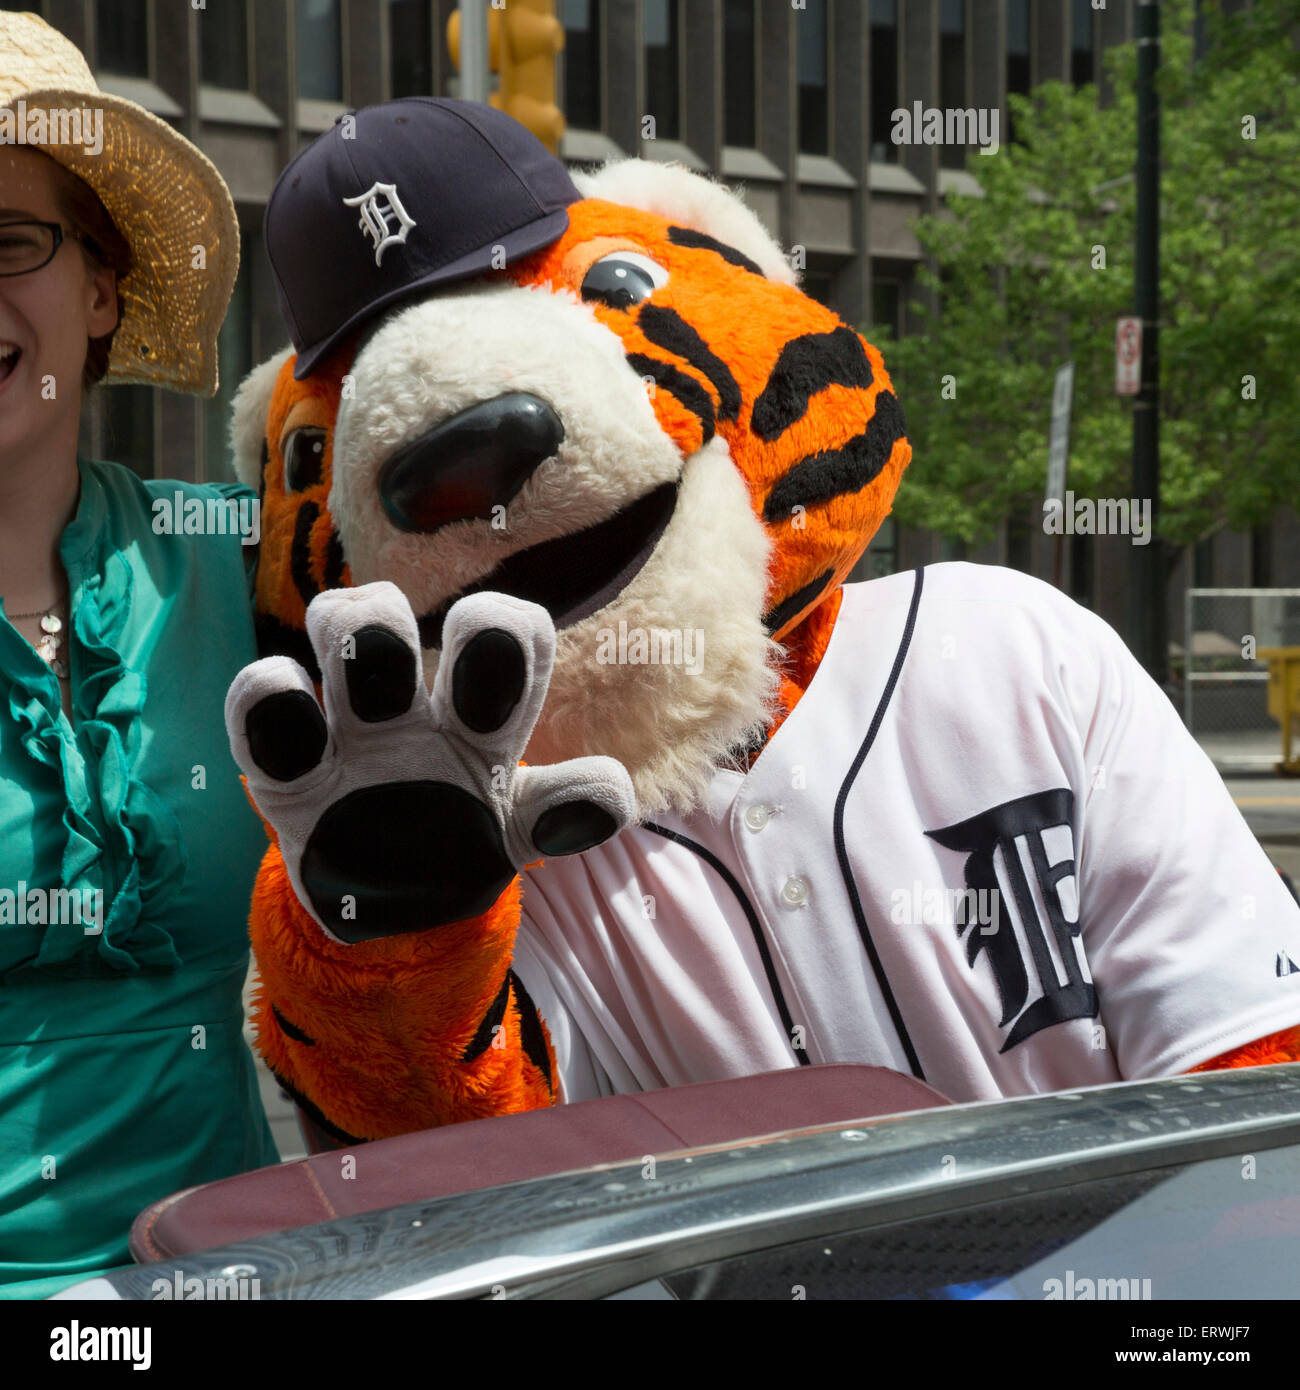 Detroit, Michigan - Paws, the mascot of the Detroit Tigers baseball team,  makes an appearance at a gay pride parade Stock Photo - Alamy